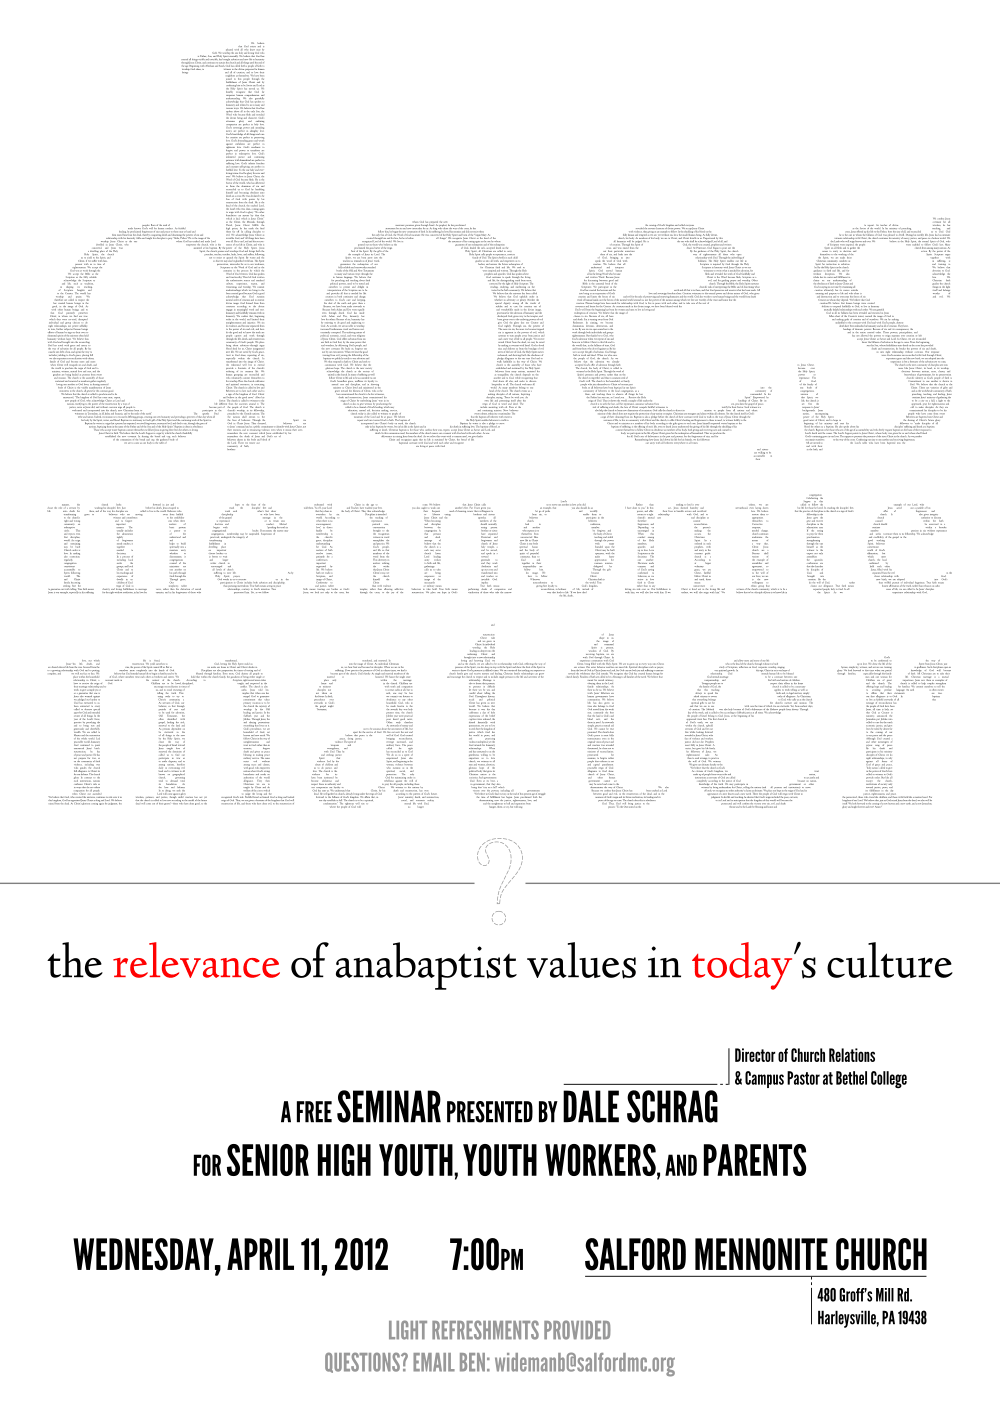 The entire Mennonite USA Confession of Faith, in tiny text, flowed to form the words “does mennonite matter”. A question mark and event details follow.